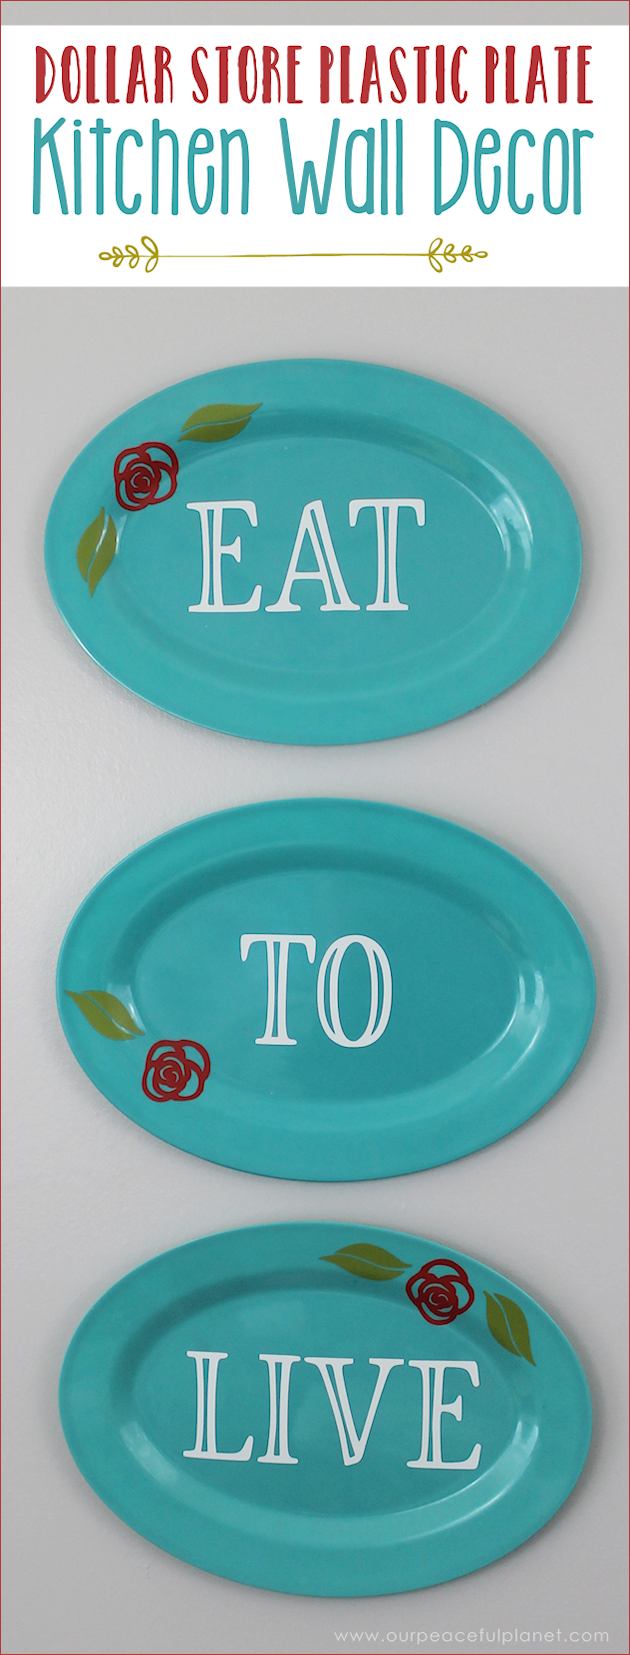 Looking for some inexpensive kitchen wall decor to brighten up your home? These darling dollar store plastic plates and platters are just the thing!